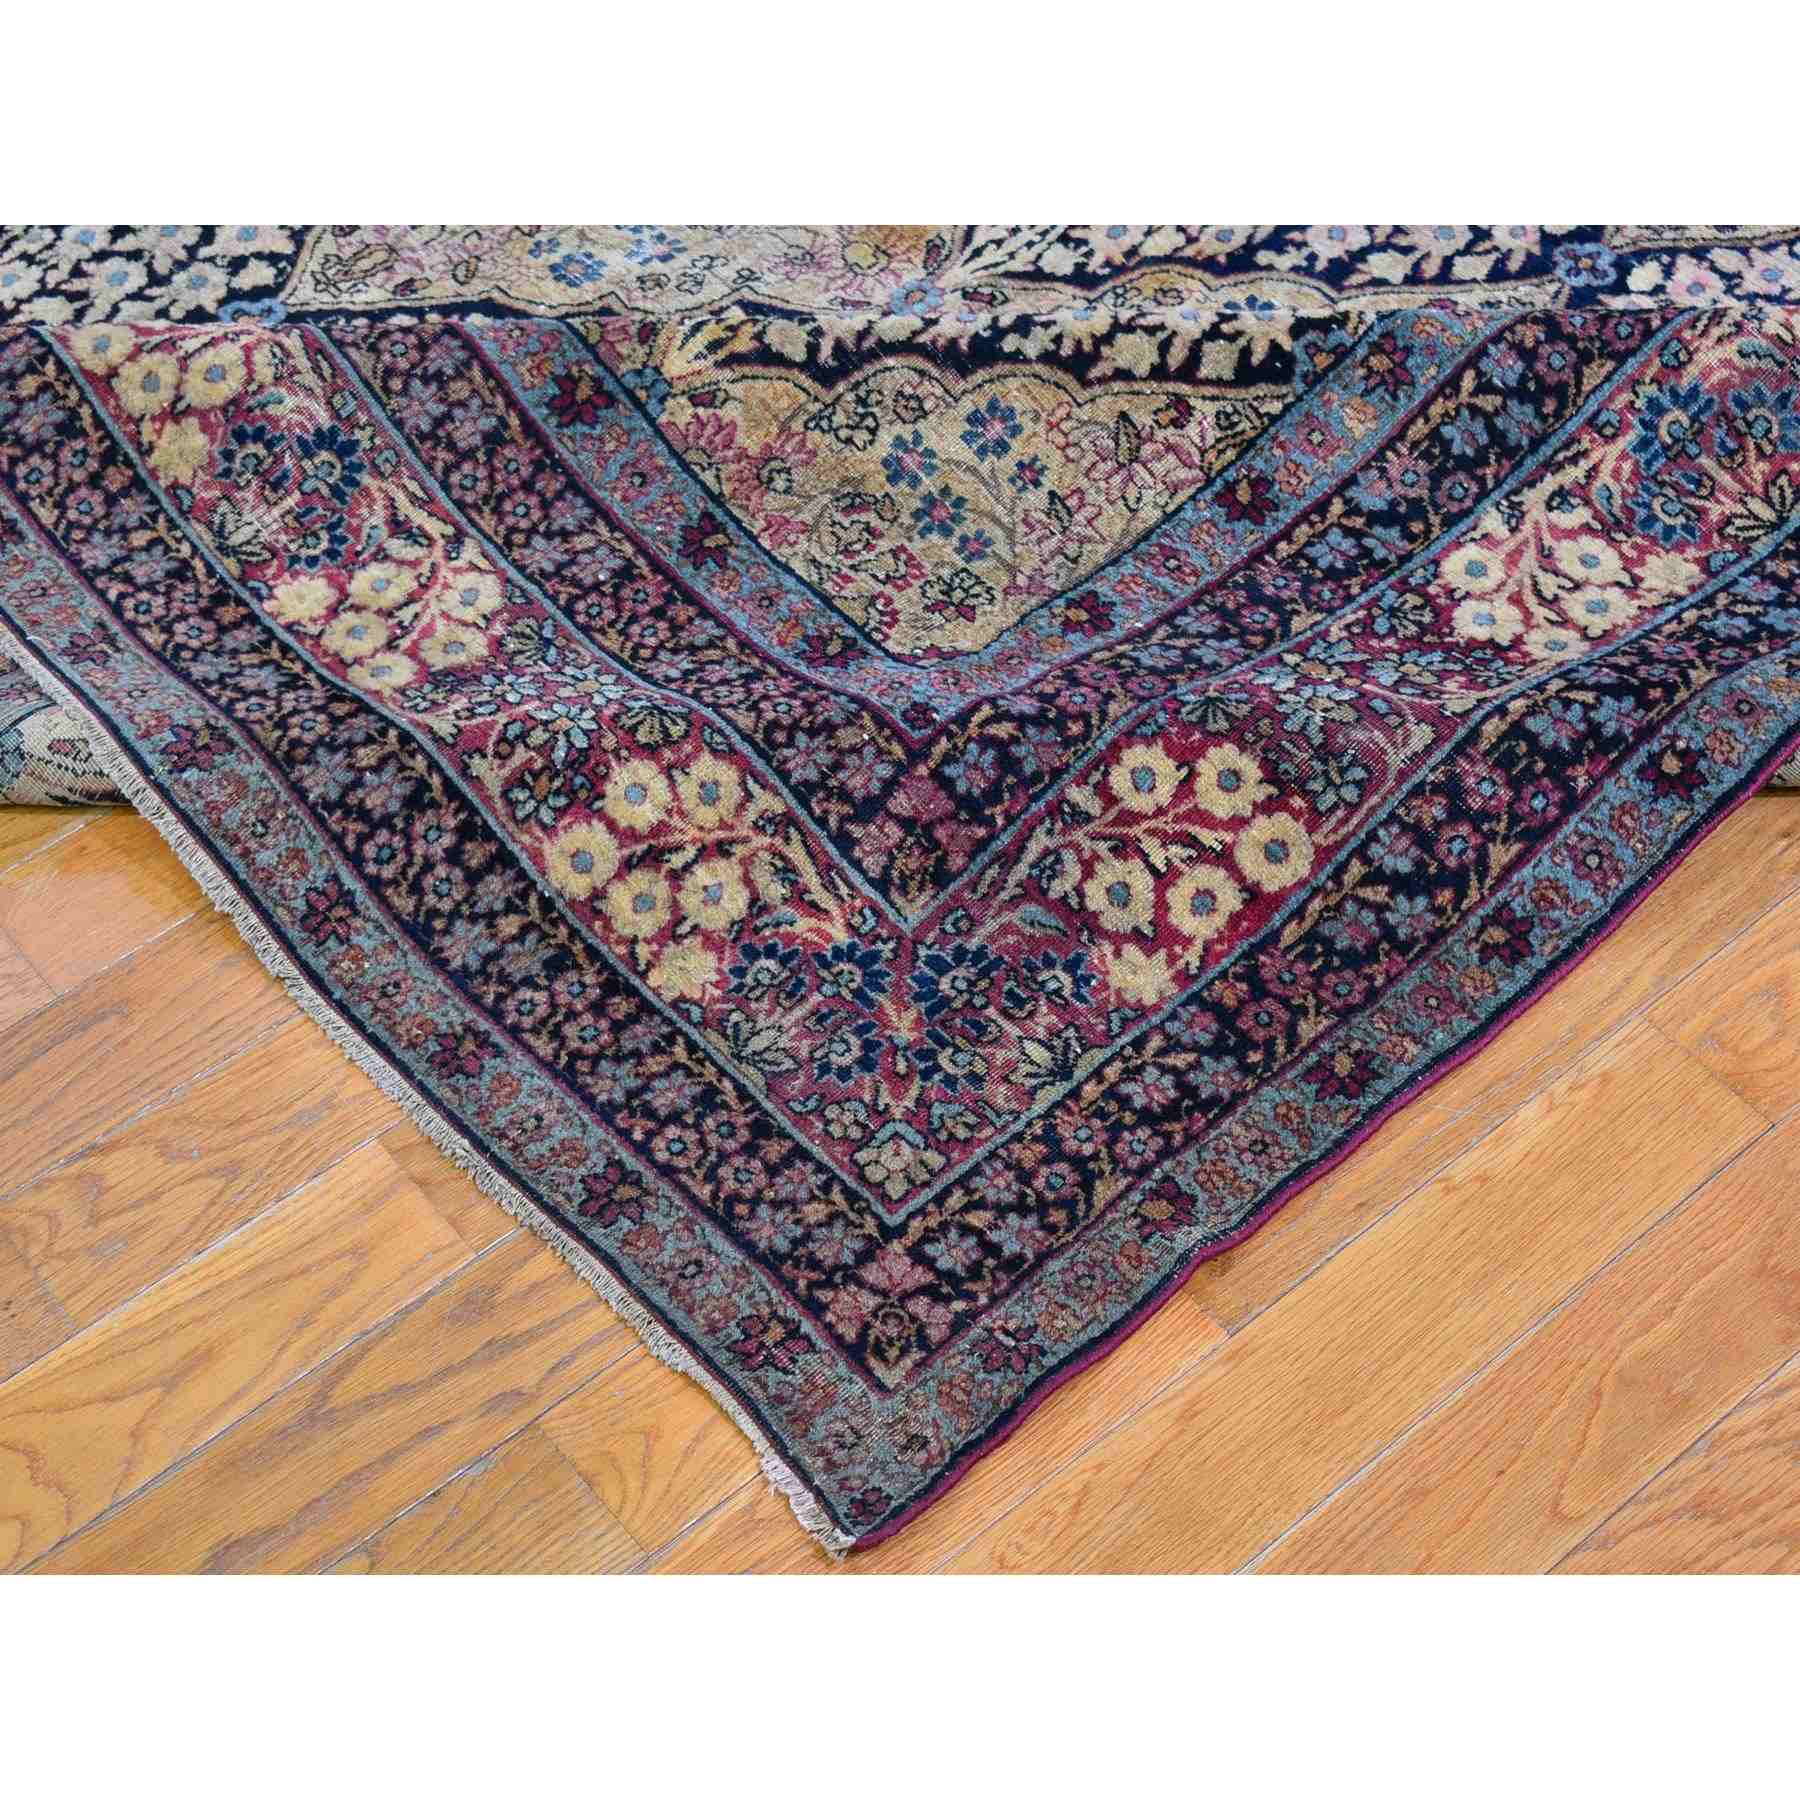 Antique-Hand-Knotted-Rug-331295